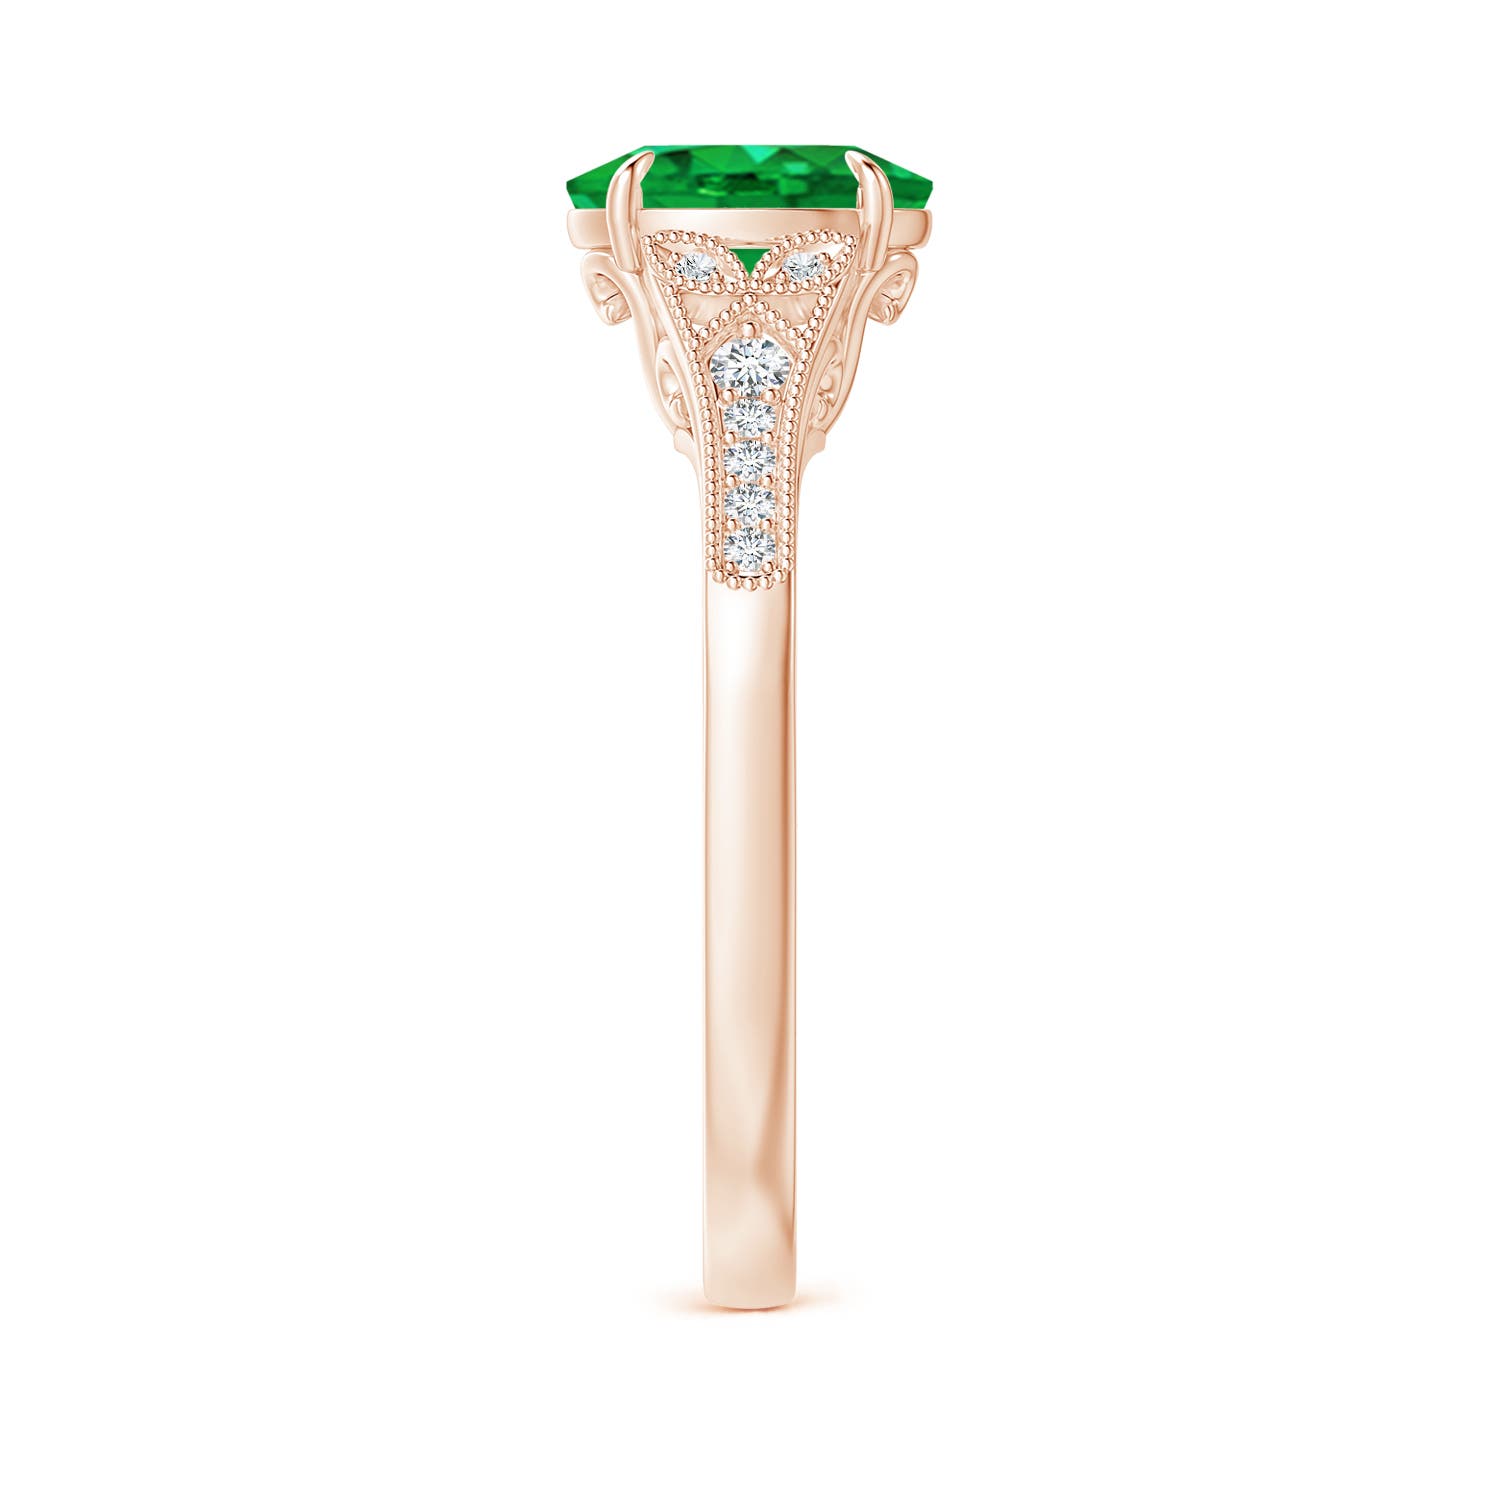 AAA - Emerald / 1.24 CT / 14 KT Rose Gold